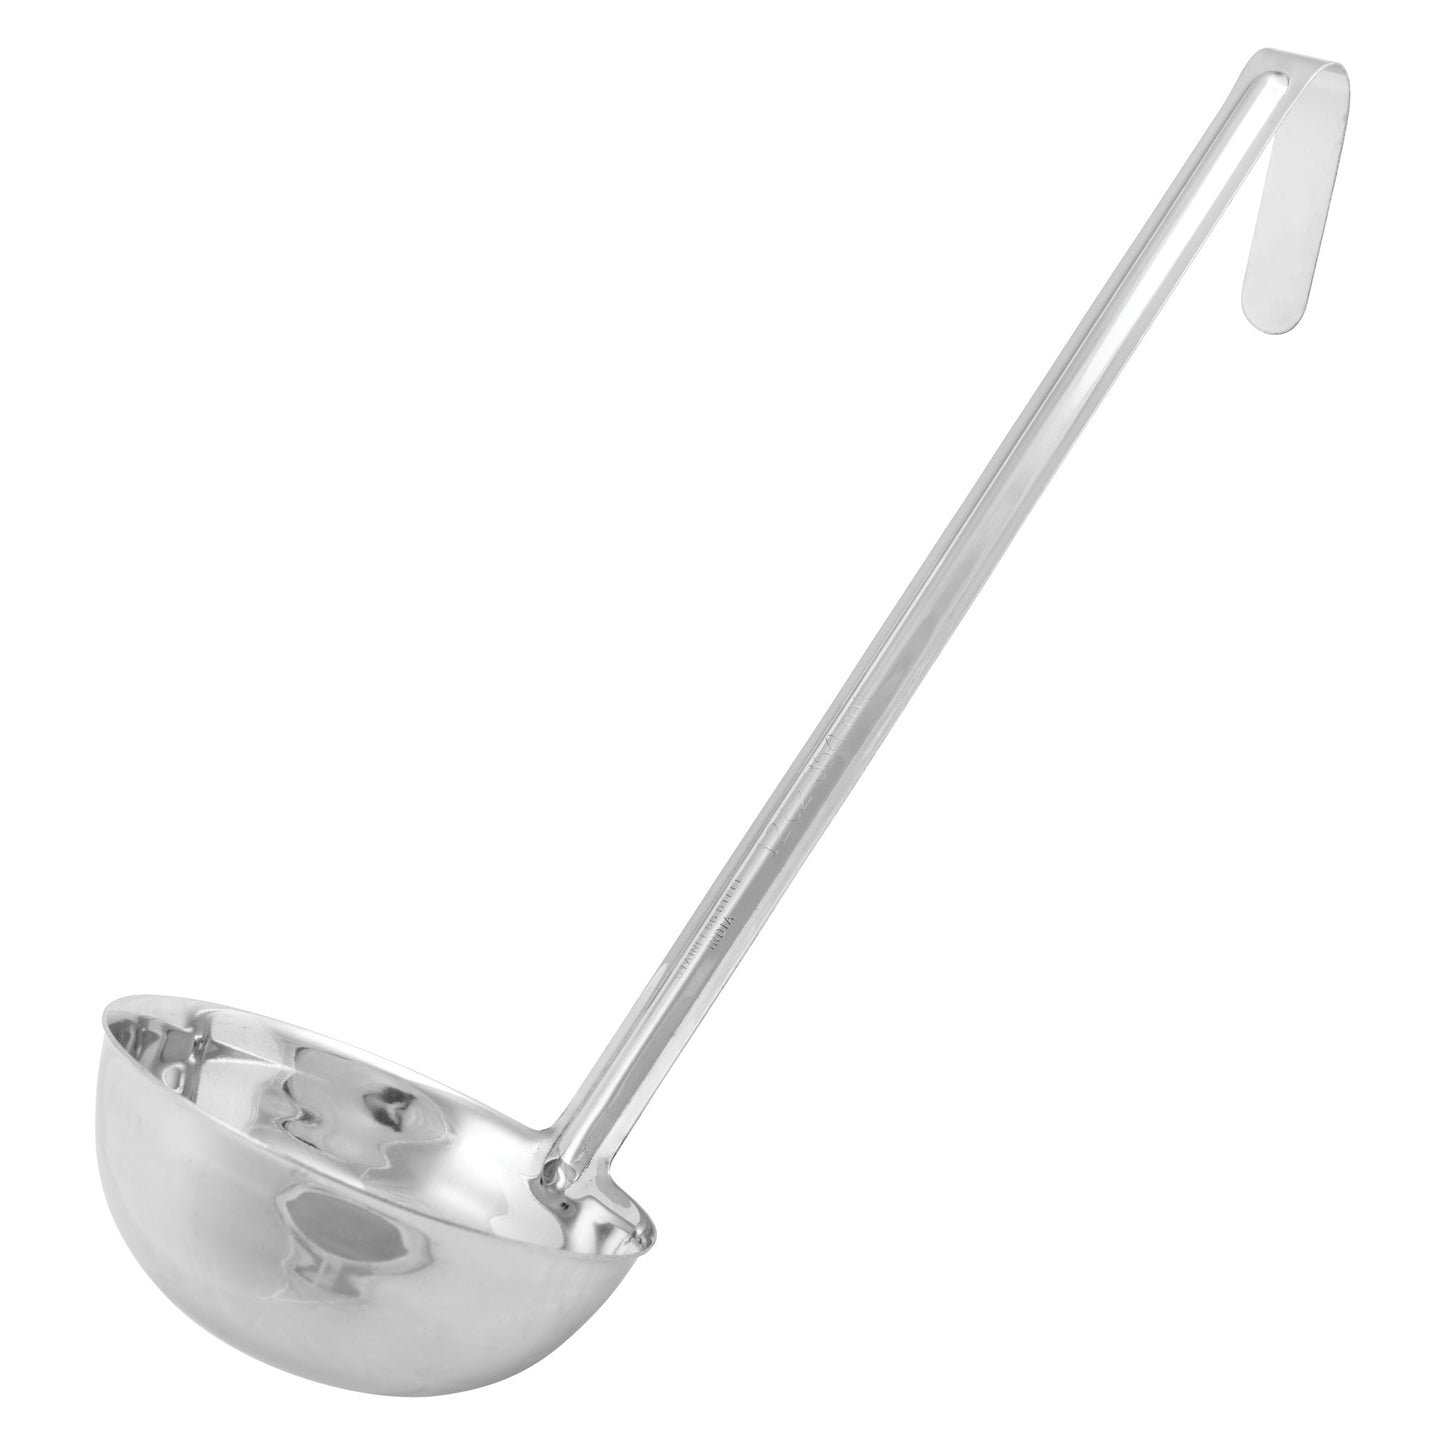 LDIN-12 - Winco Prime One-Piece Ladle, Stainless Steel - 12 oz